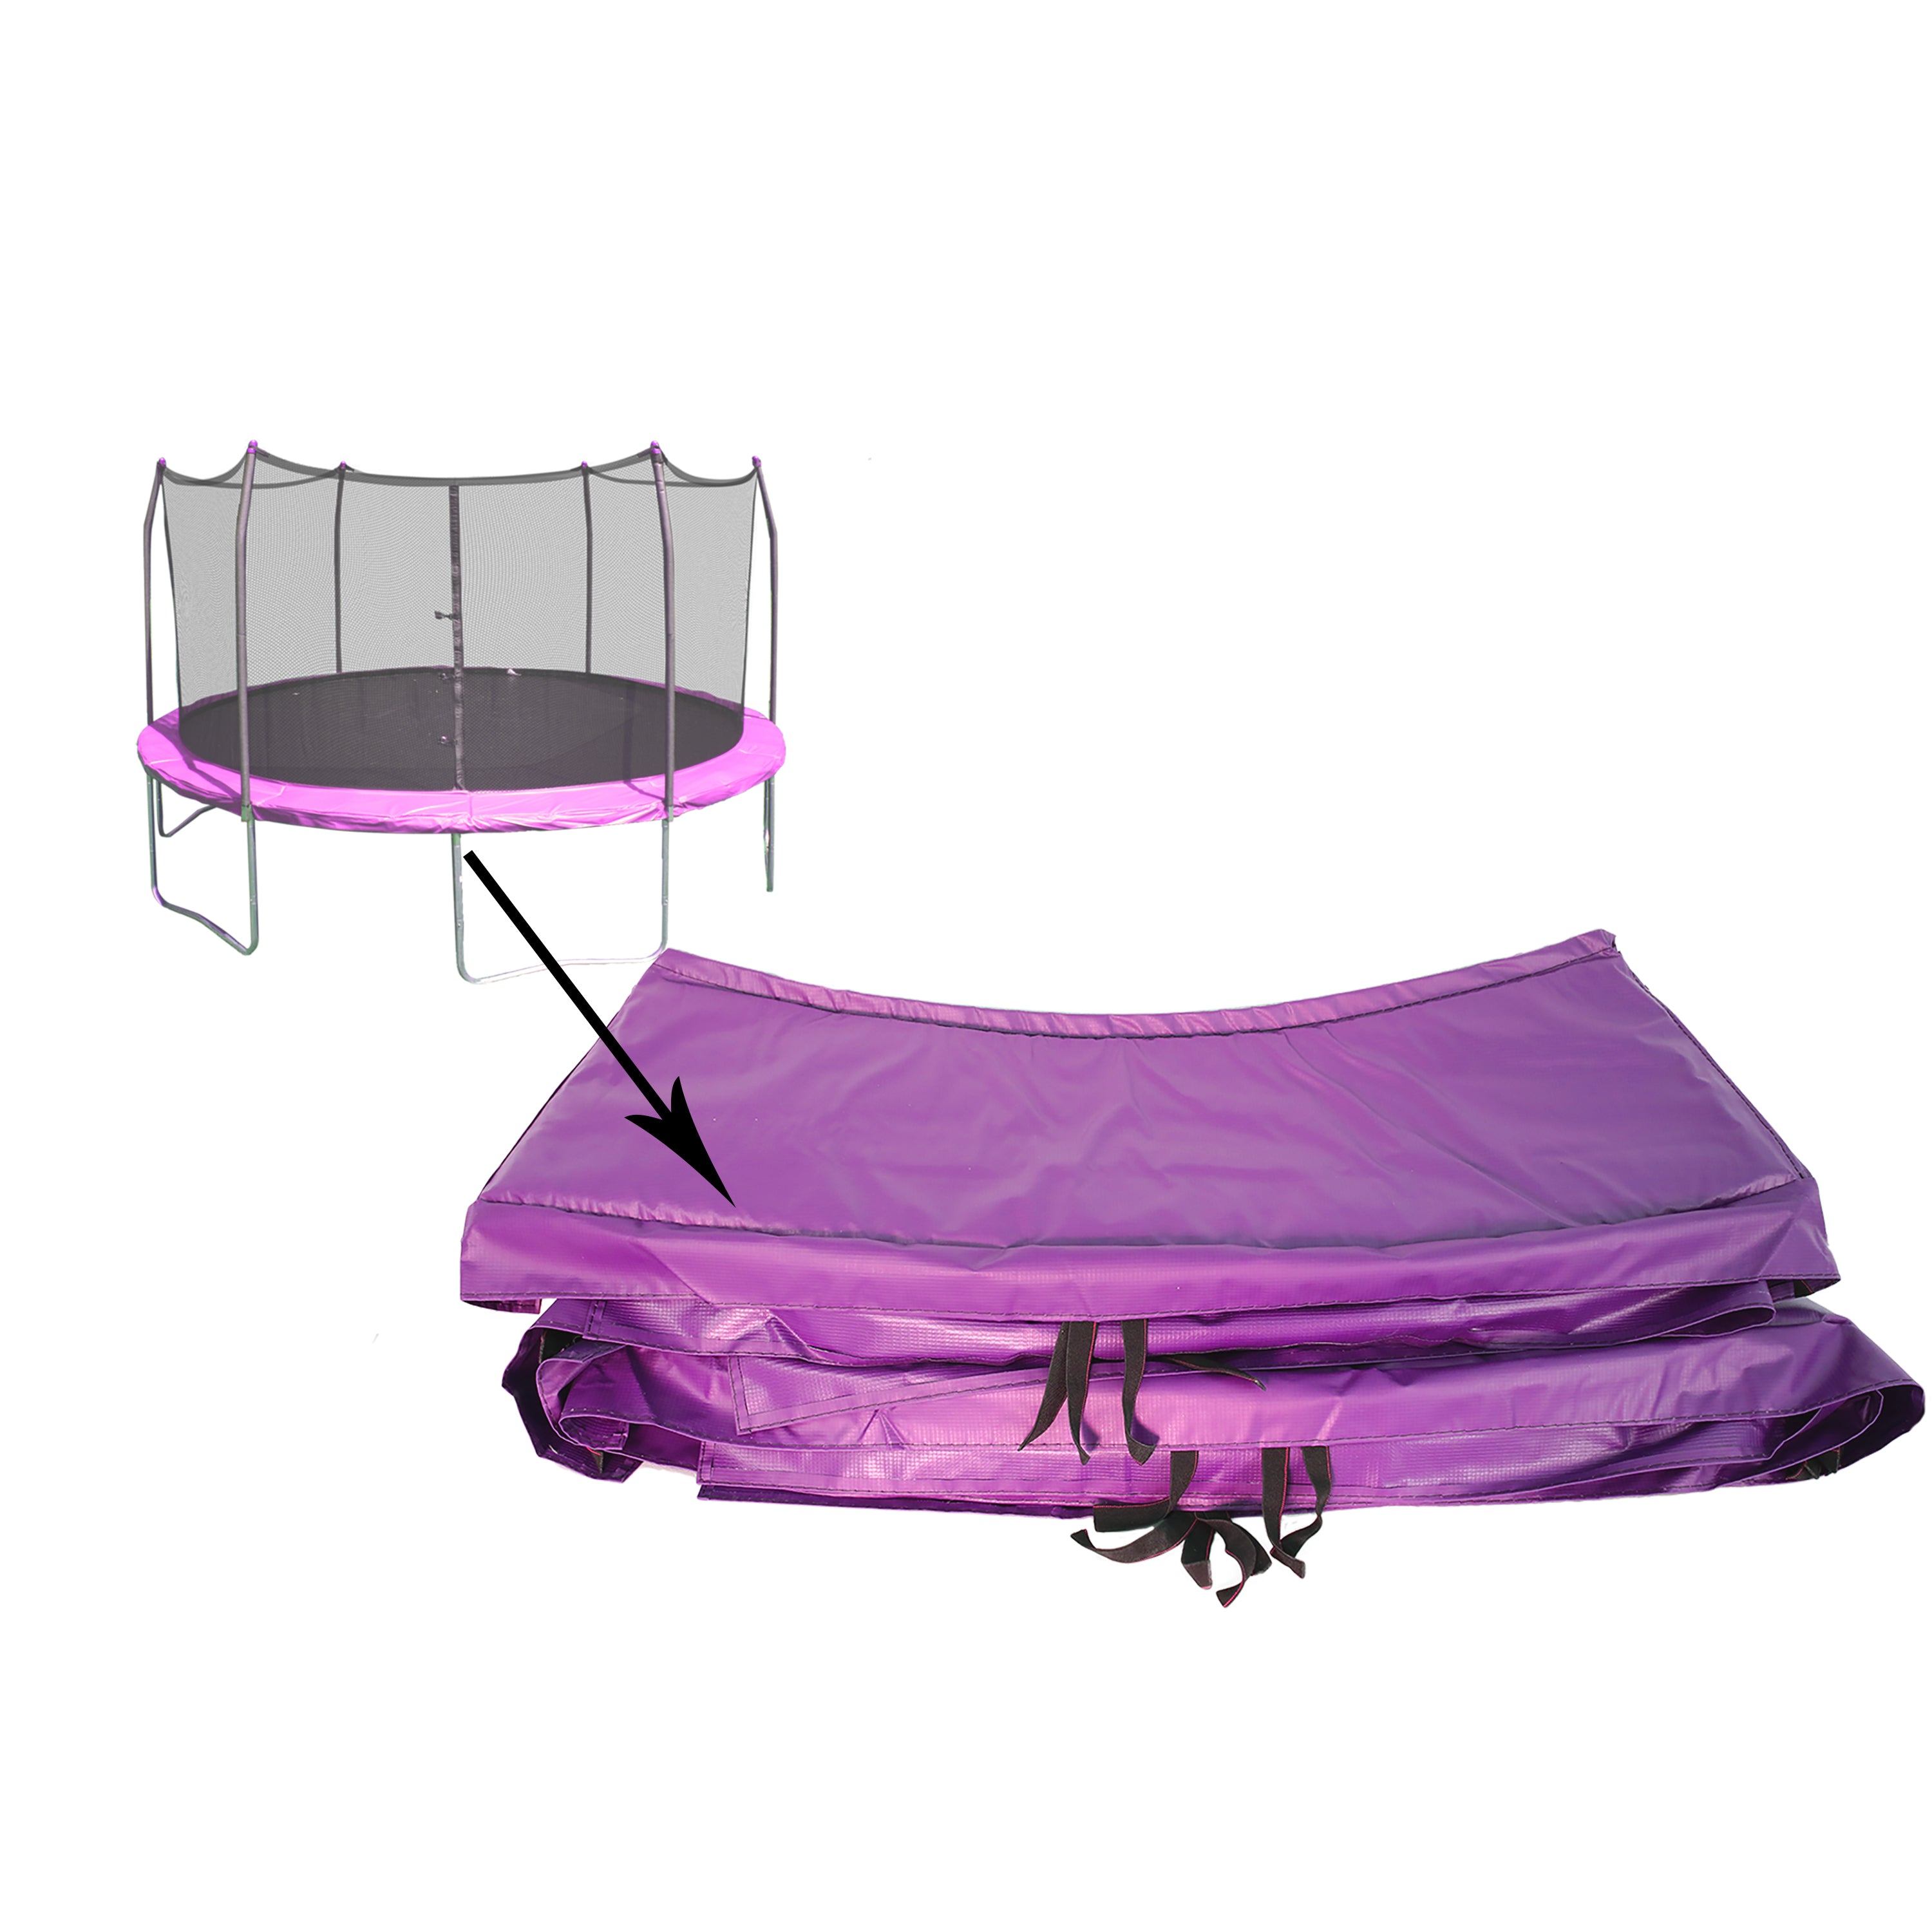 Purple spring pad compatible with 14-foot round trampolines.